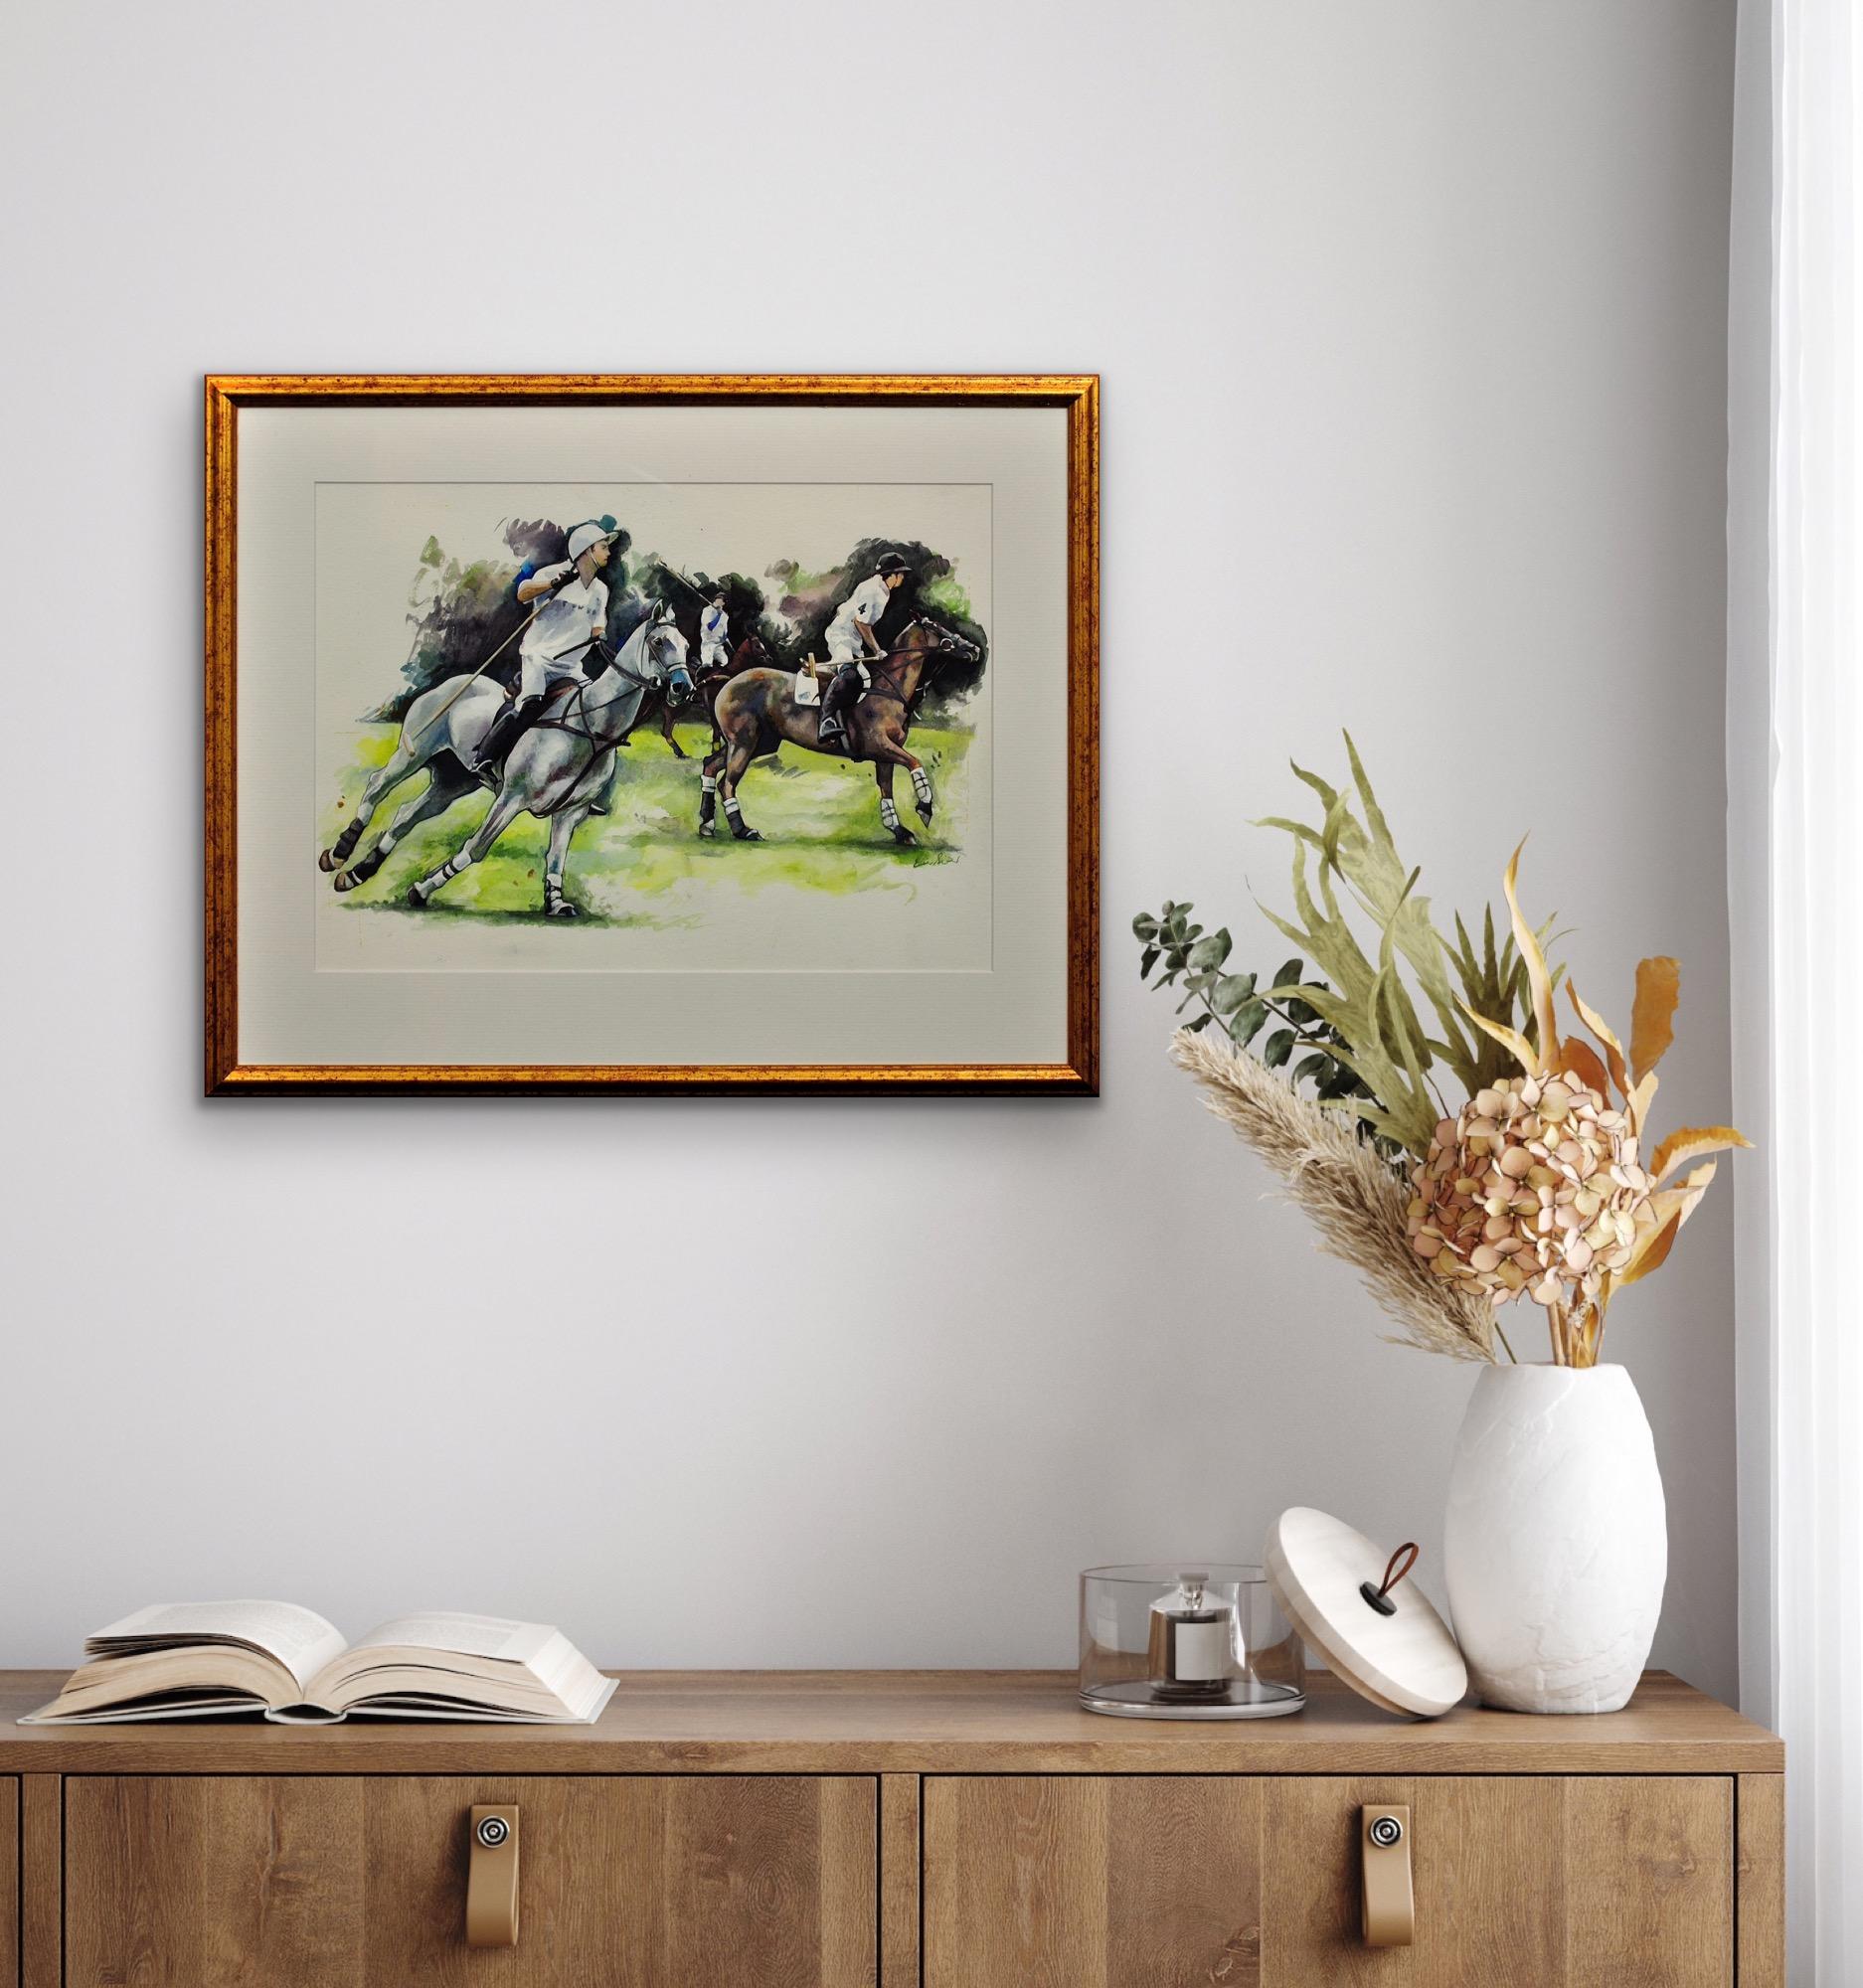 Polo Match, Cirencester, The First Chukka. Cotswolds. Parkland.Framed Watercolor For Sale 9